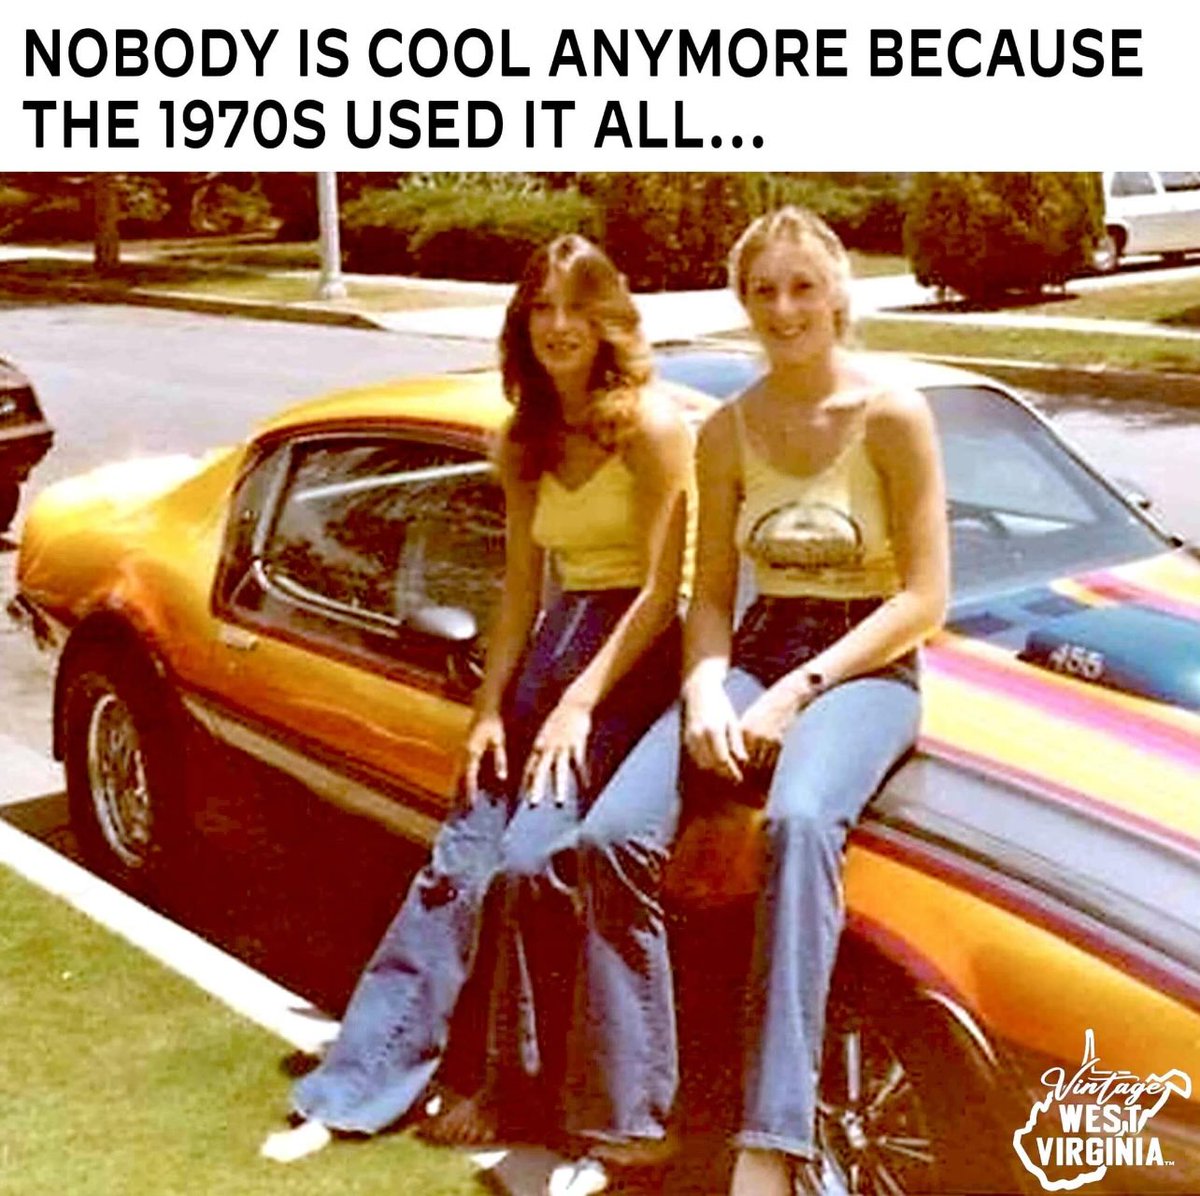 Agree 70’s and 80’s